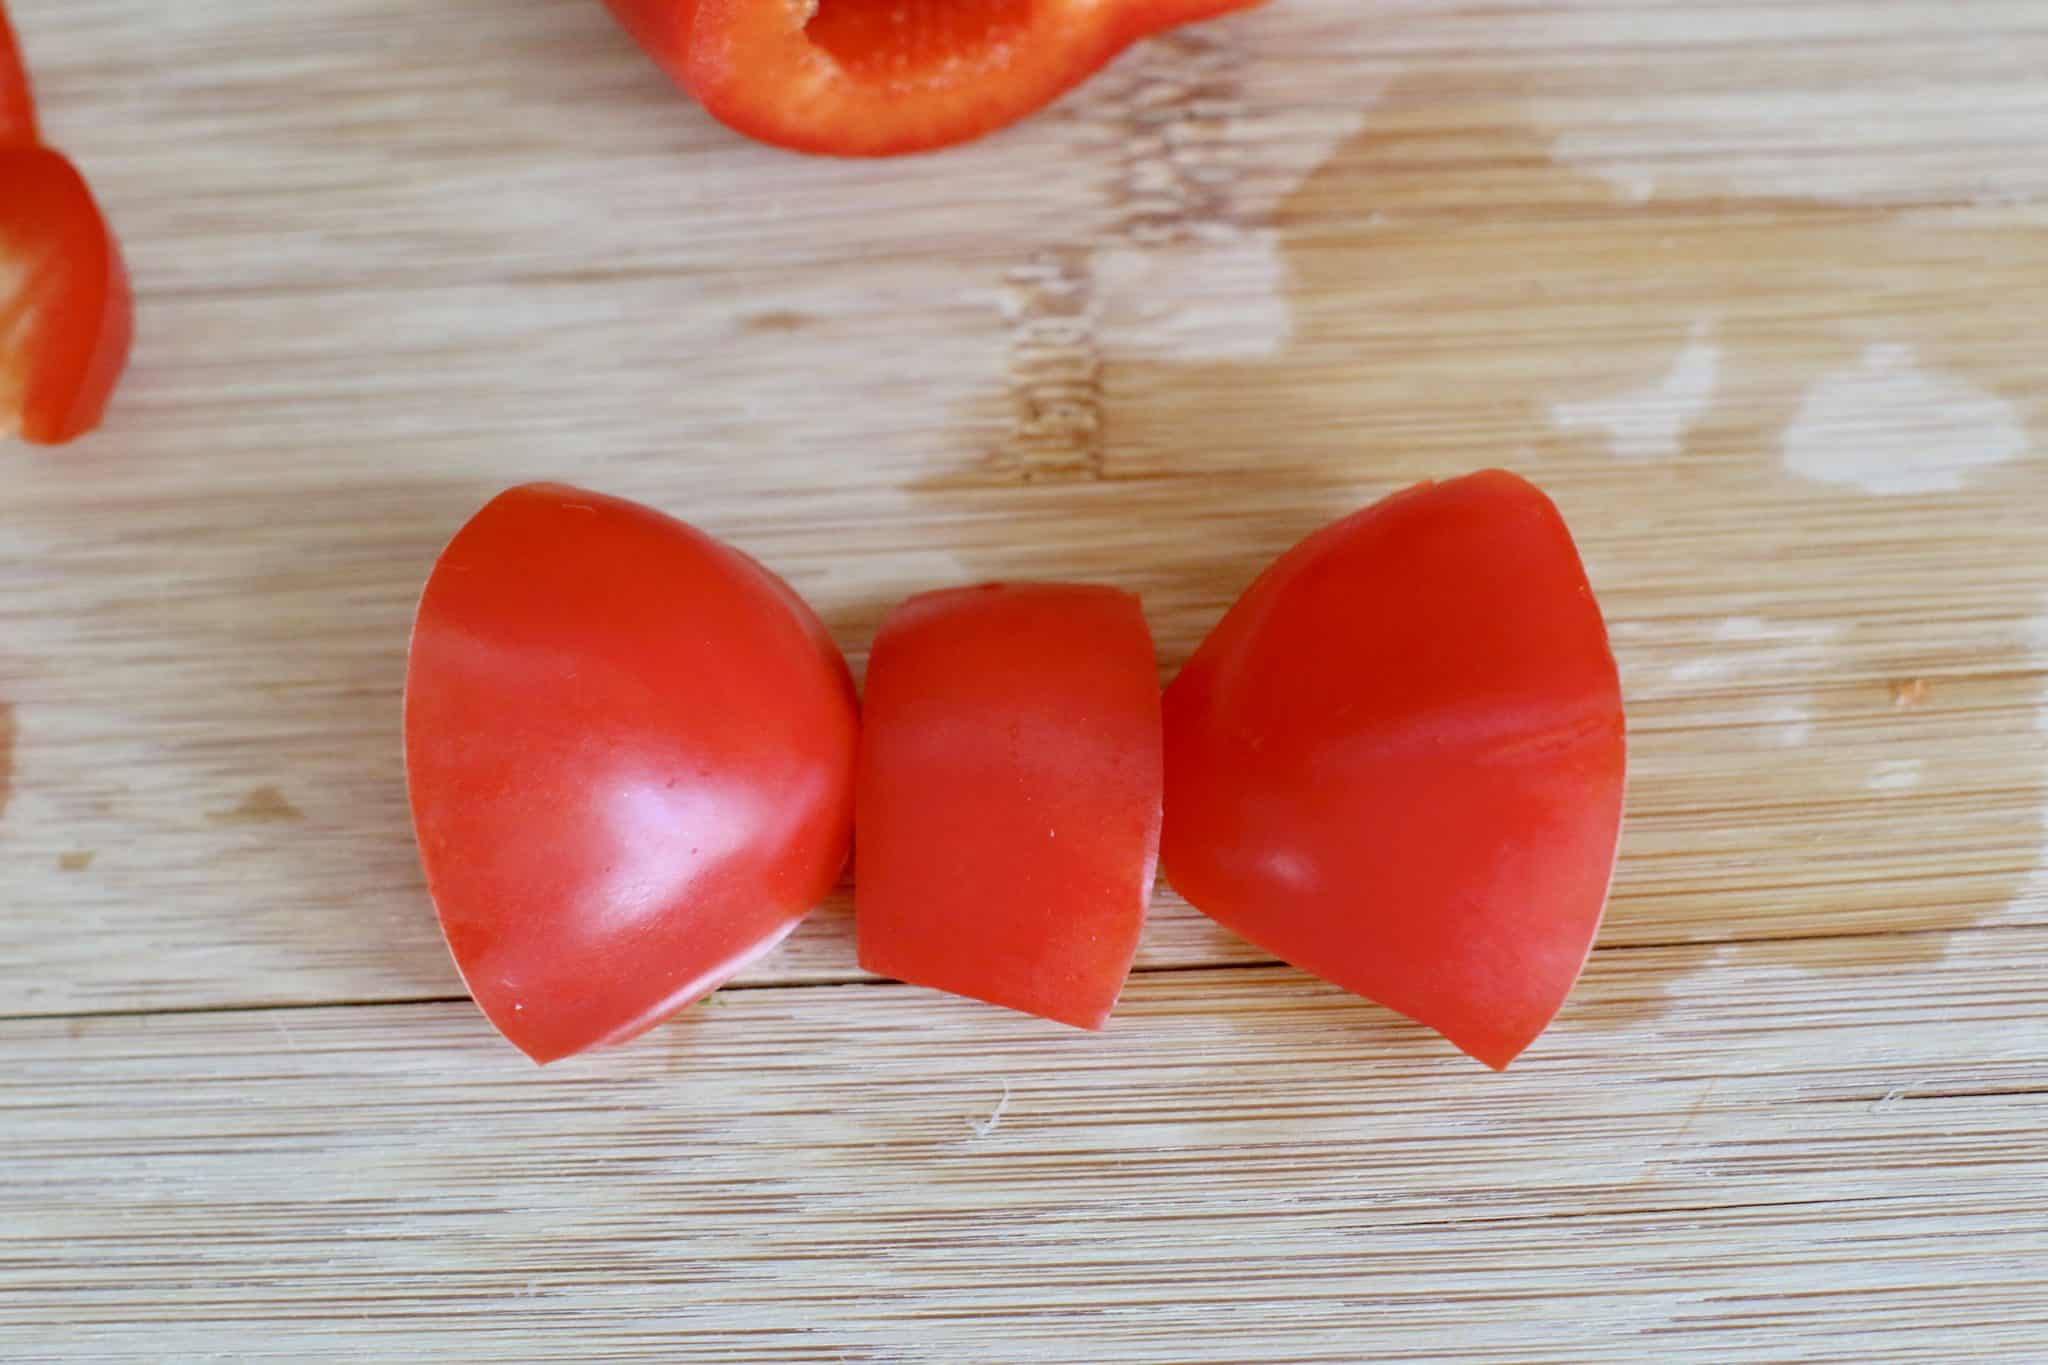 red pepper cut and shaped into a bow.